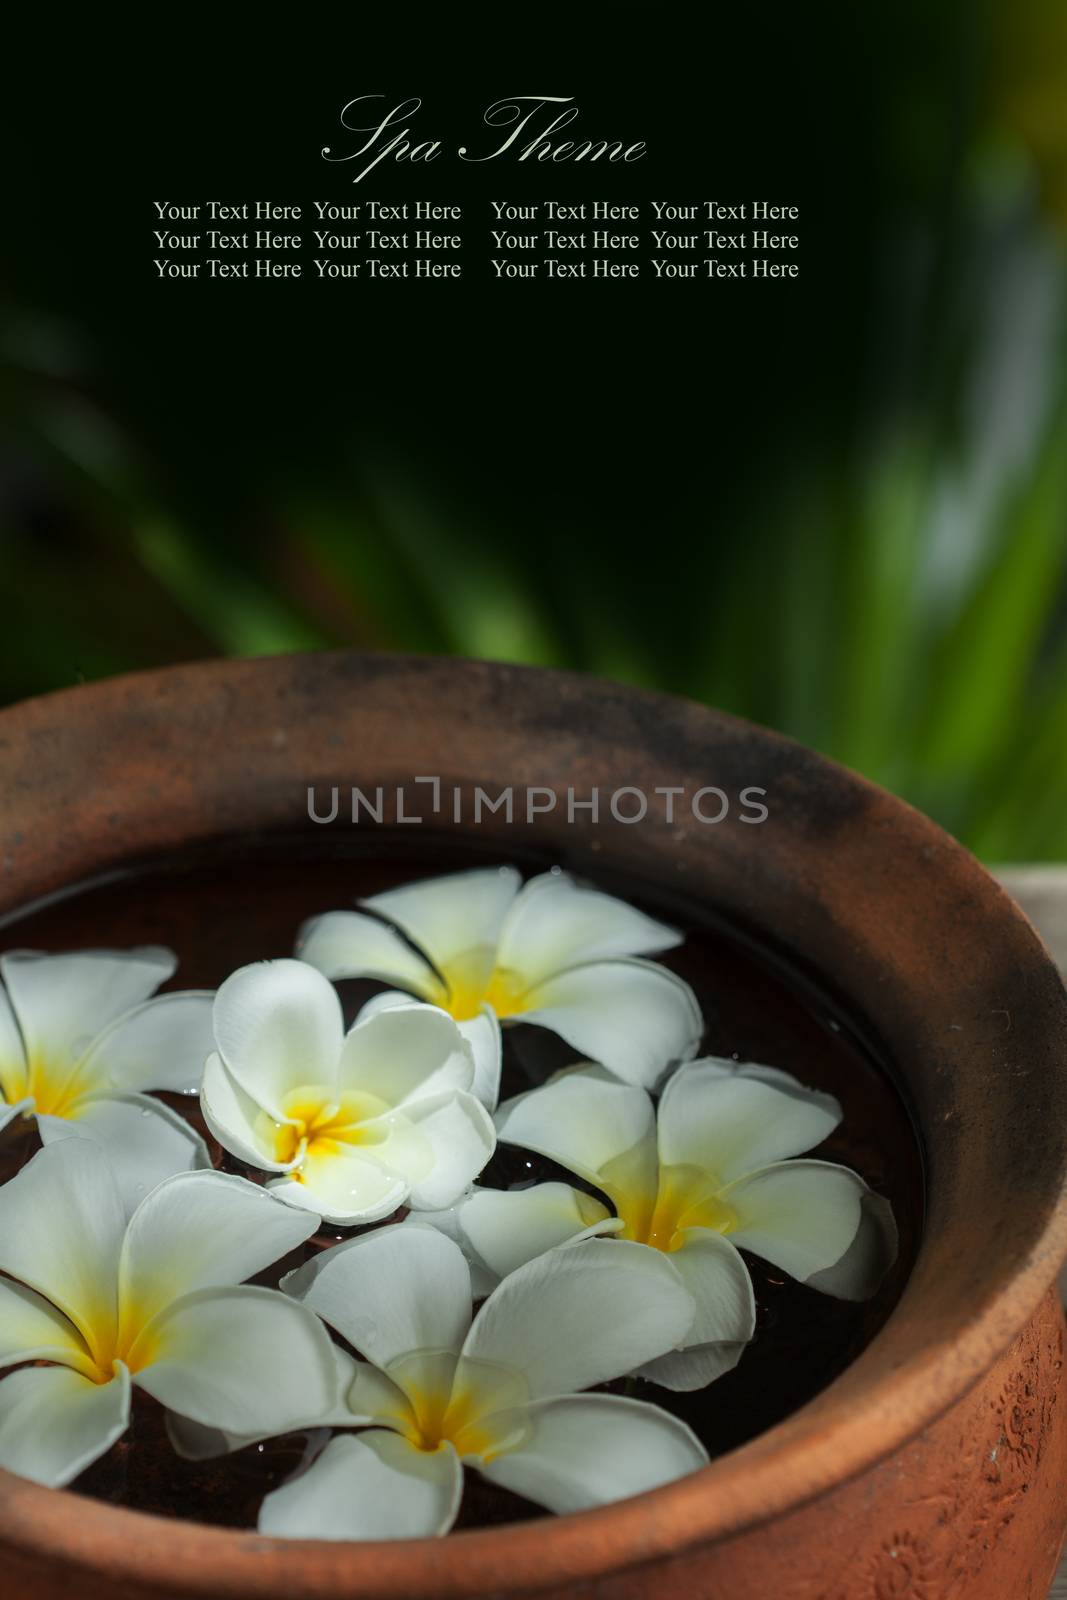 close up view of   frangipani  flowers in pot  on color back